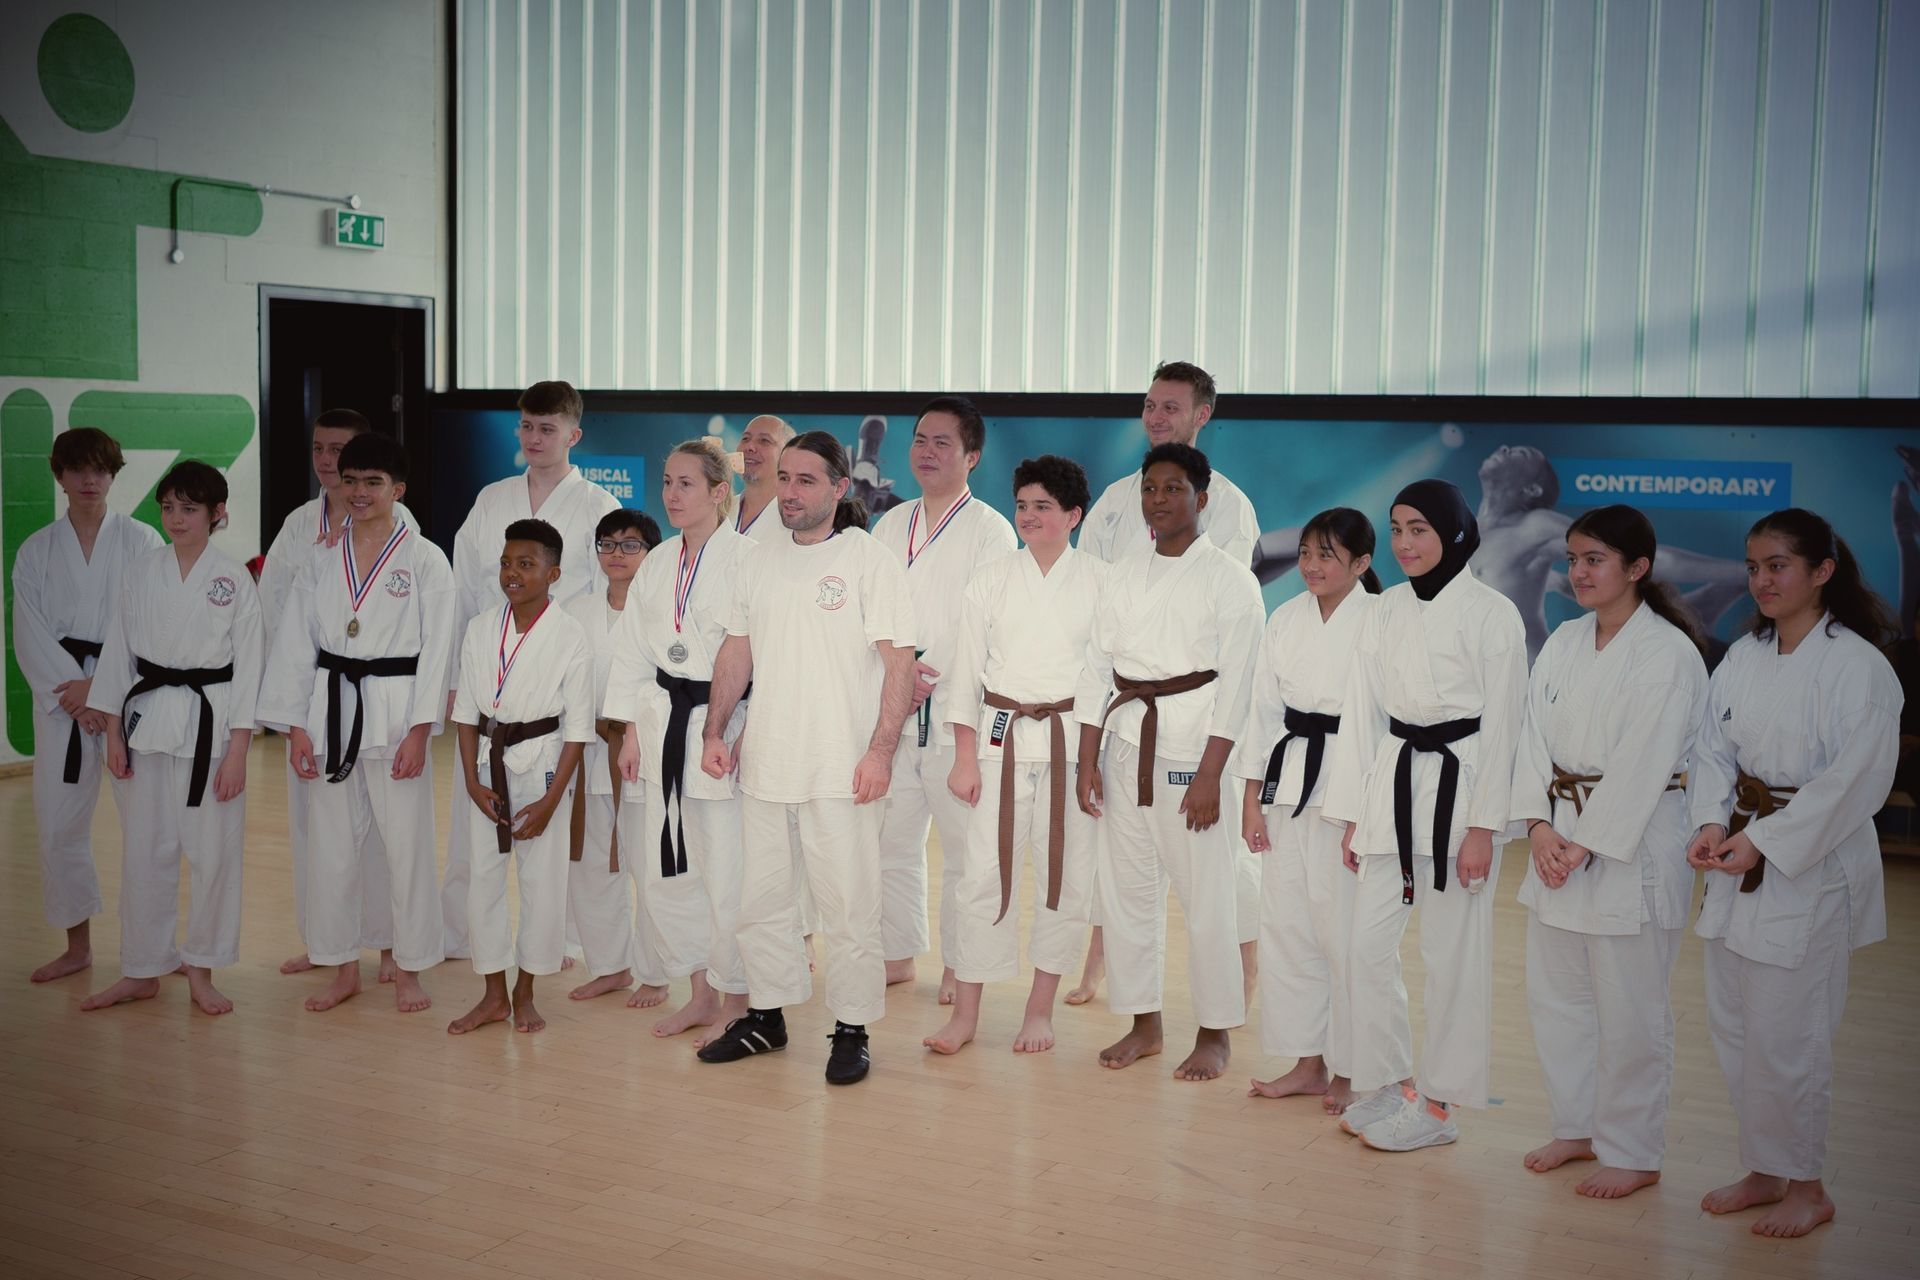 Brief history of our dojo, My Karate Club. Offering karate classes since 2000 to present at the Porchester Centre, in London.